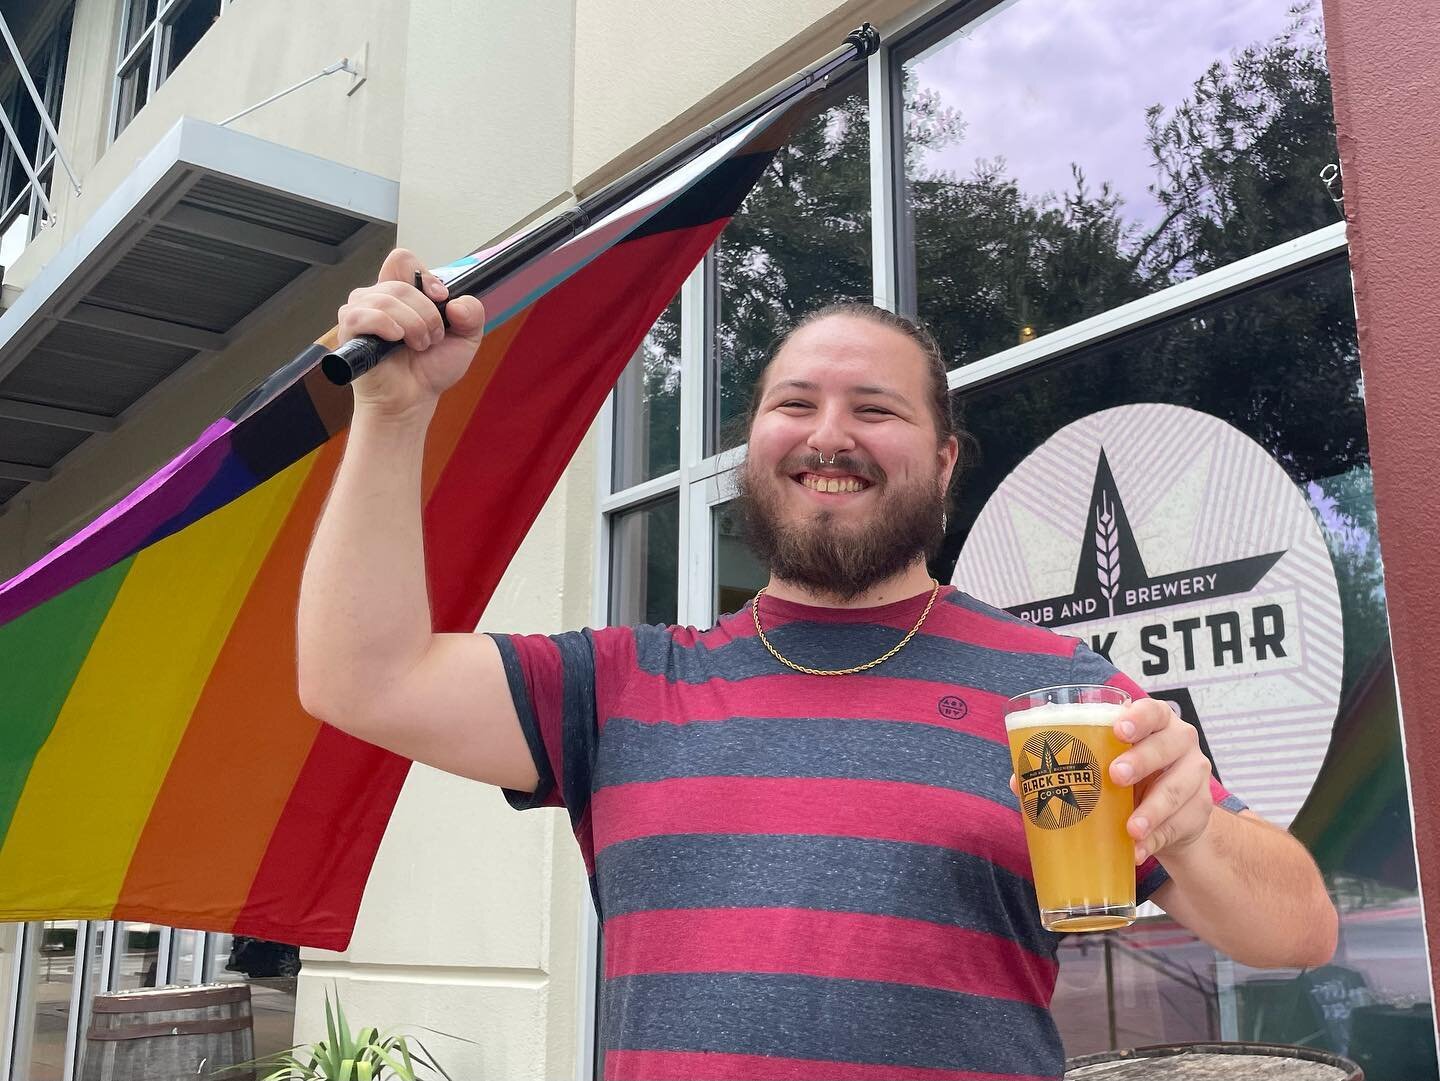 No matter what flag you&rsquo;re flying today, EVERYONE IS WELCOME at Black Star Coop!❤️🏳️&zwj;🌈